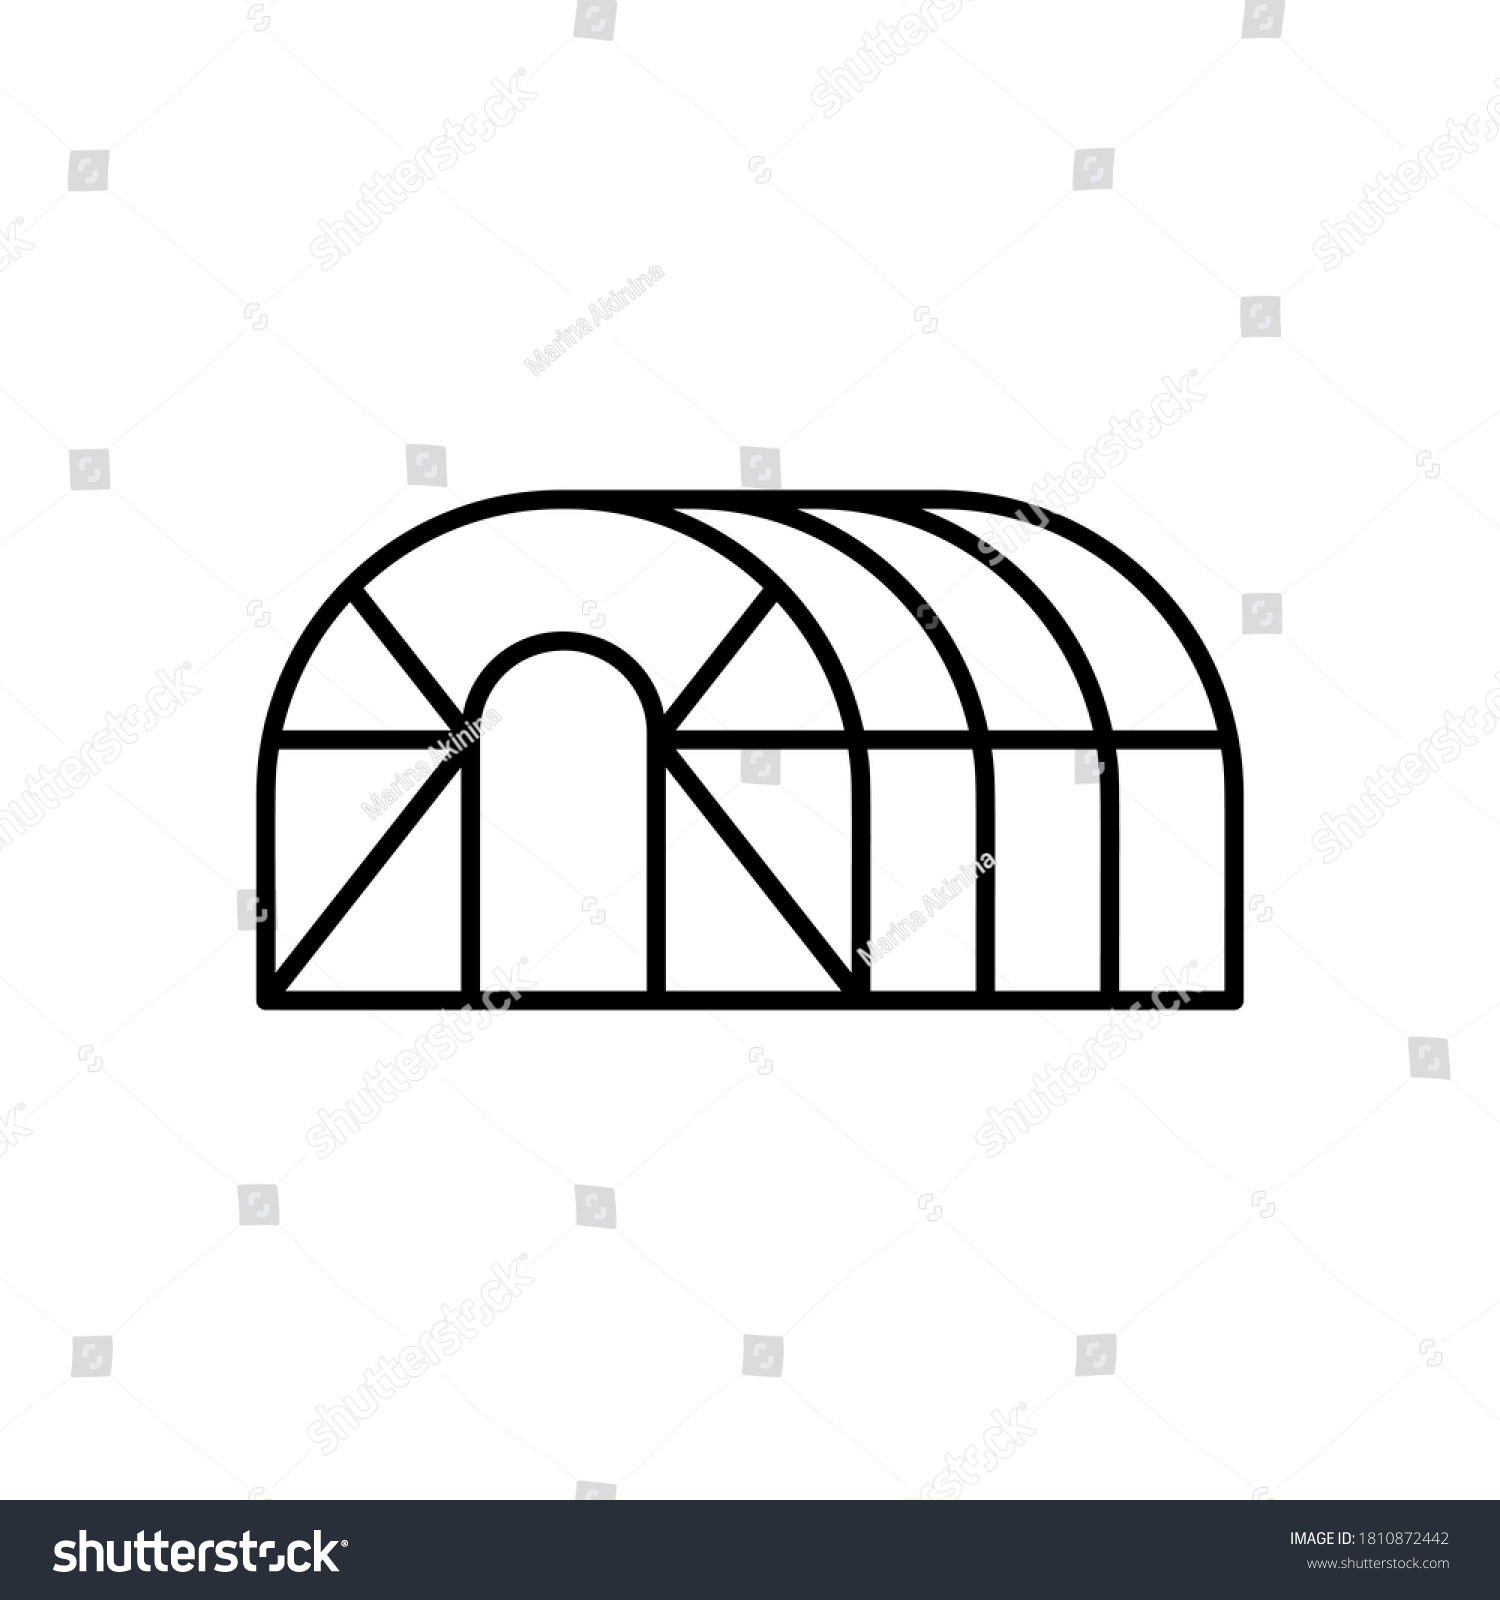 SVG of Greenhouse hemisphere. Linear icon of frame glasshouse for gardening, agriculture. Black simple illustration of oval conservatory. Contour isolated vector emblem on white background svg